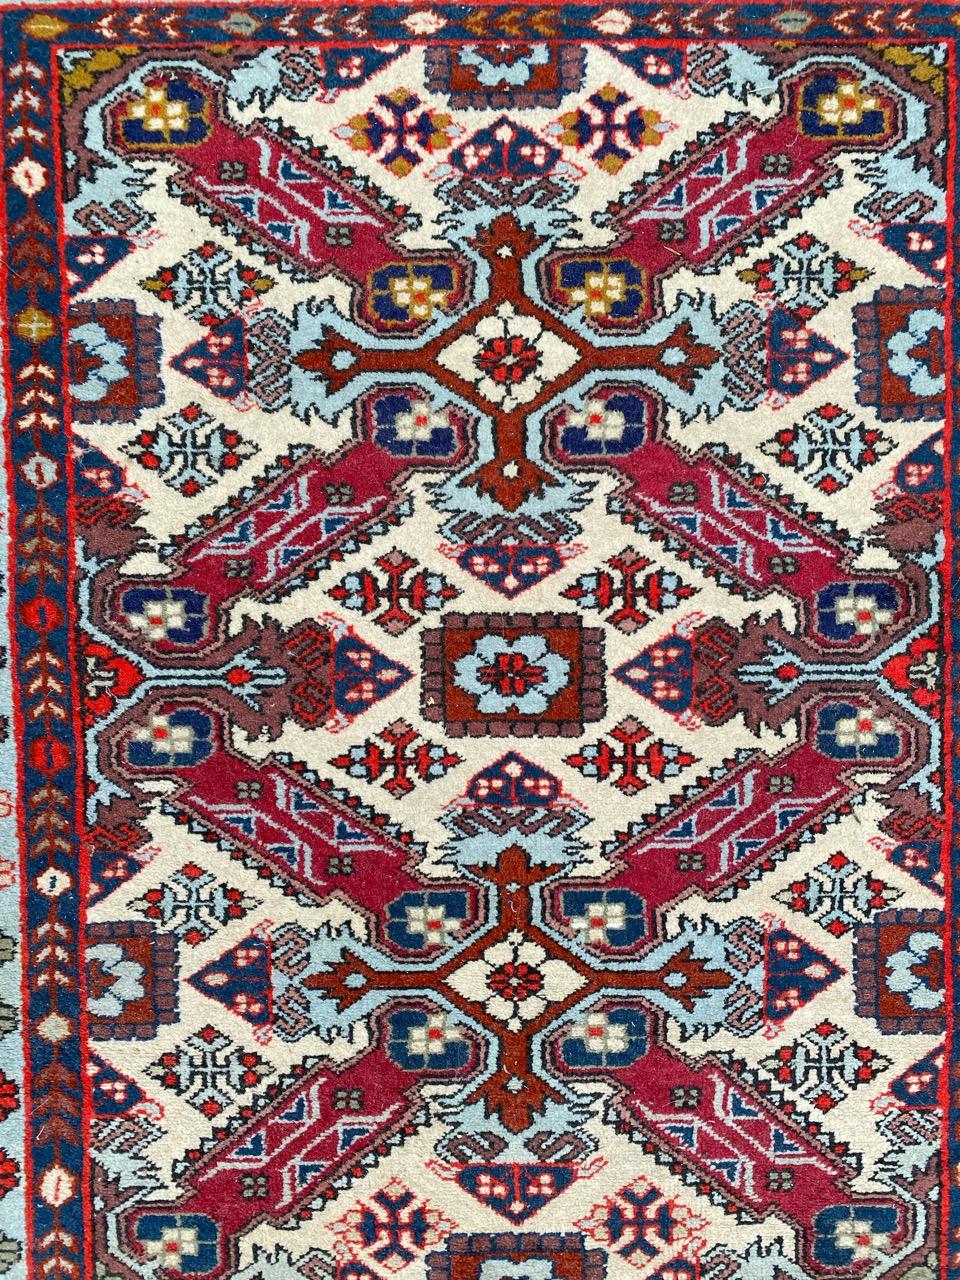 Very beautiful little rug with a Caucasian design and beautiful colors, entirely hand knotted with wool velvet on cotton foundation.